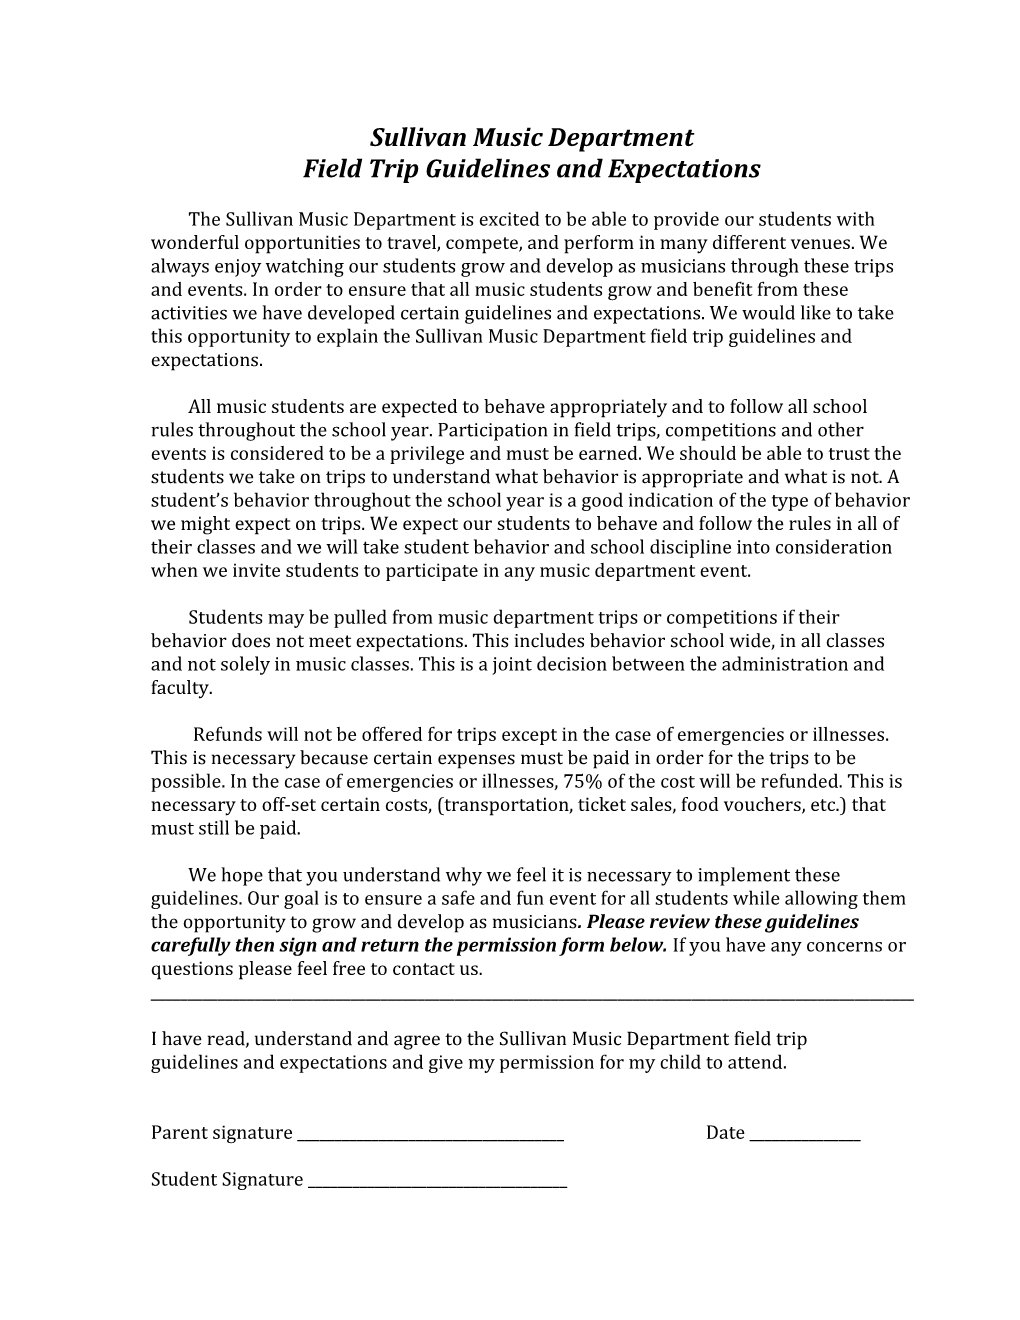 Field Trip Guidelines and Expectations